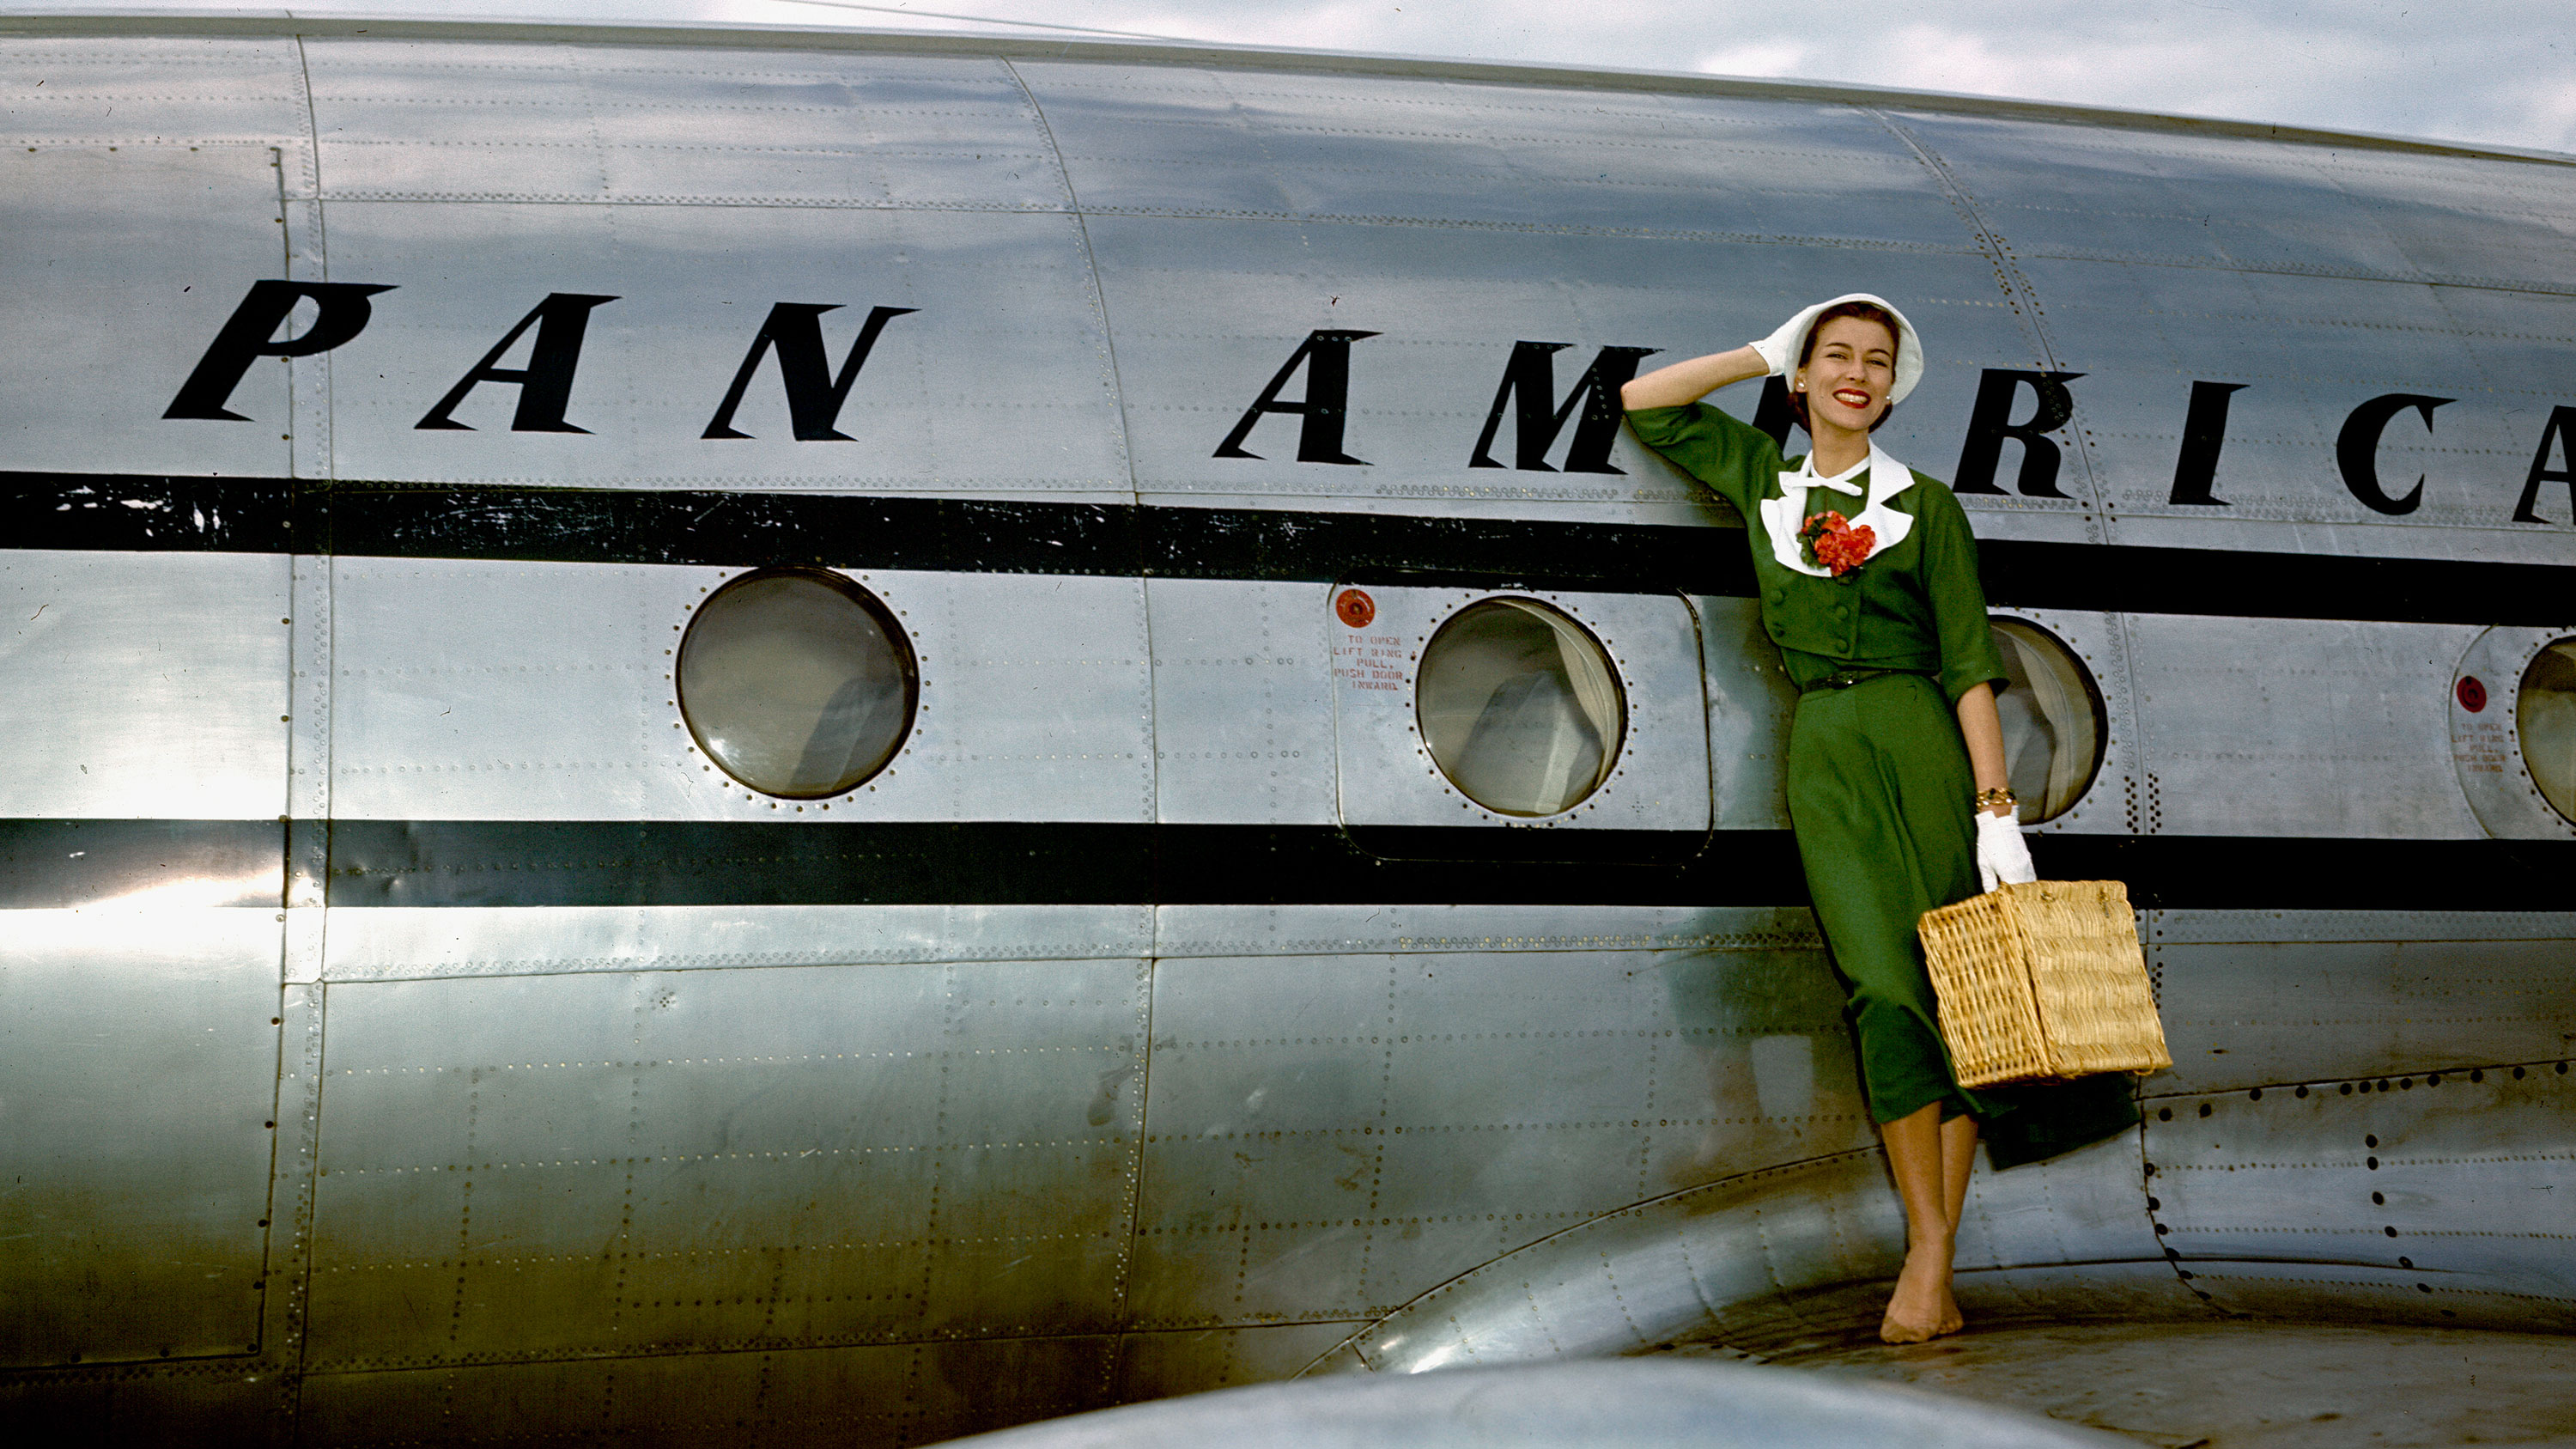 Pan American World Airways is perhaps the airline most closely linked with the 'Golden age'.